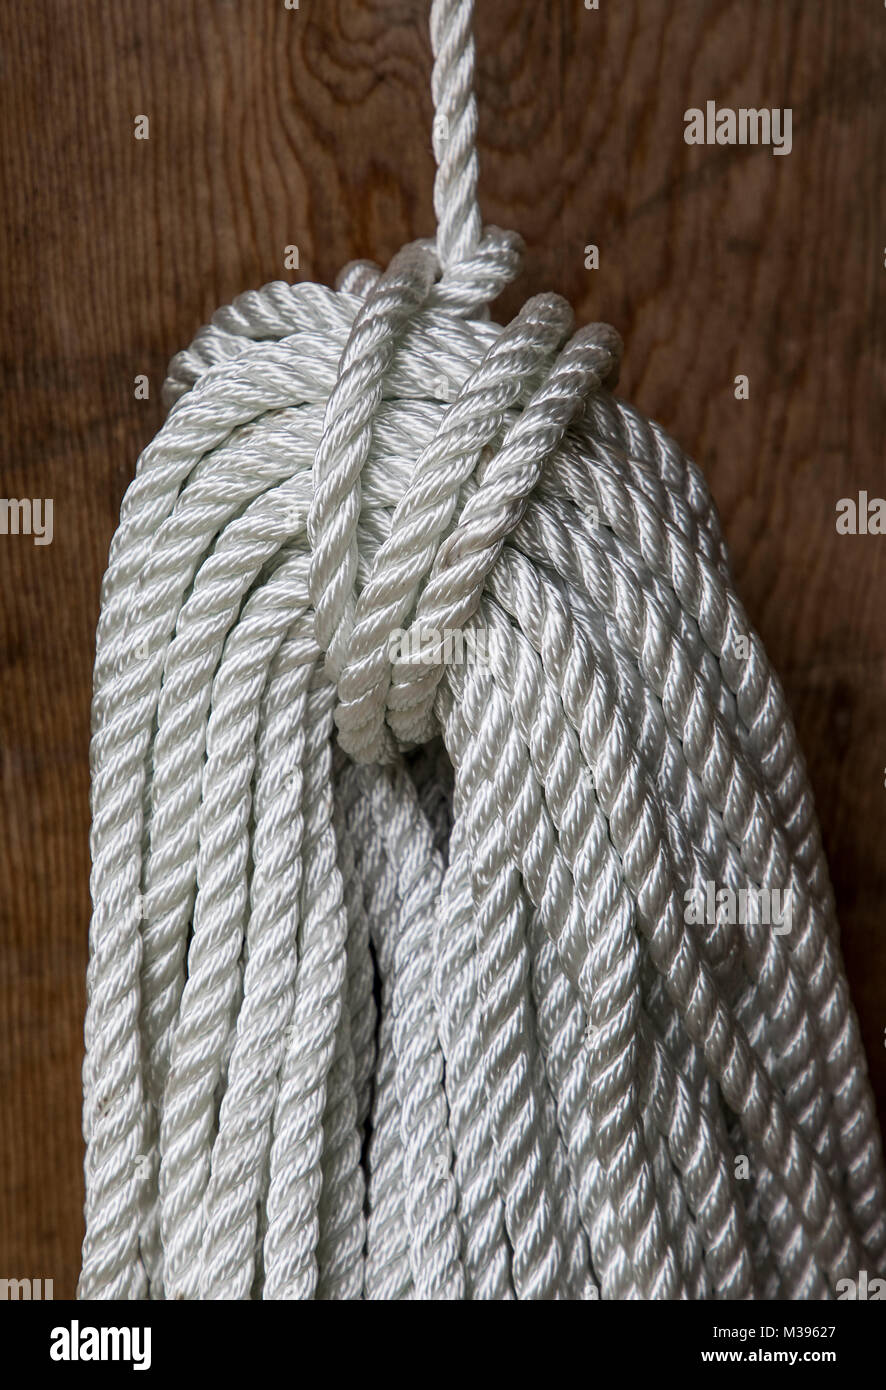 A hank of synthetic rope used in sailing Stock Photo